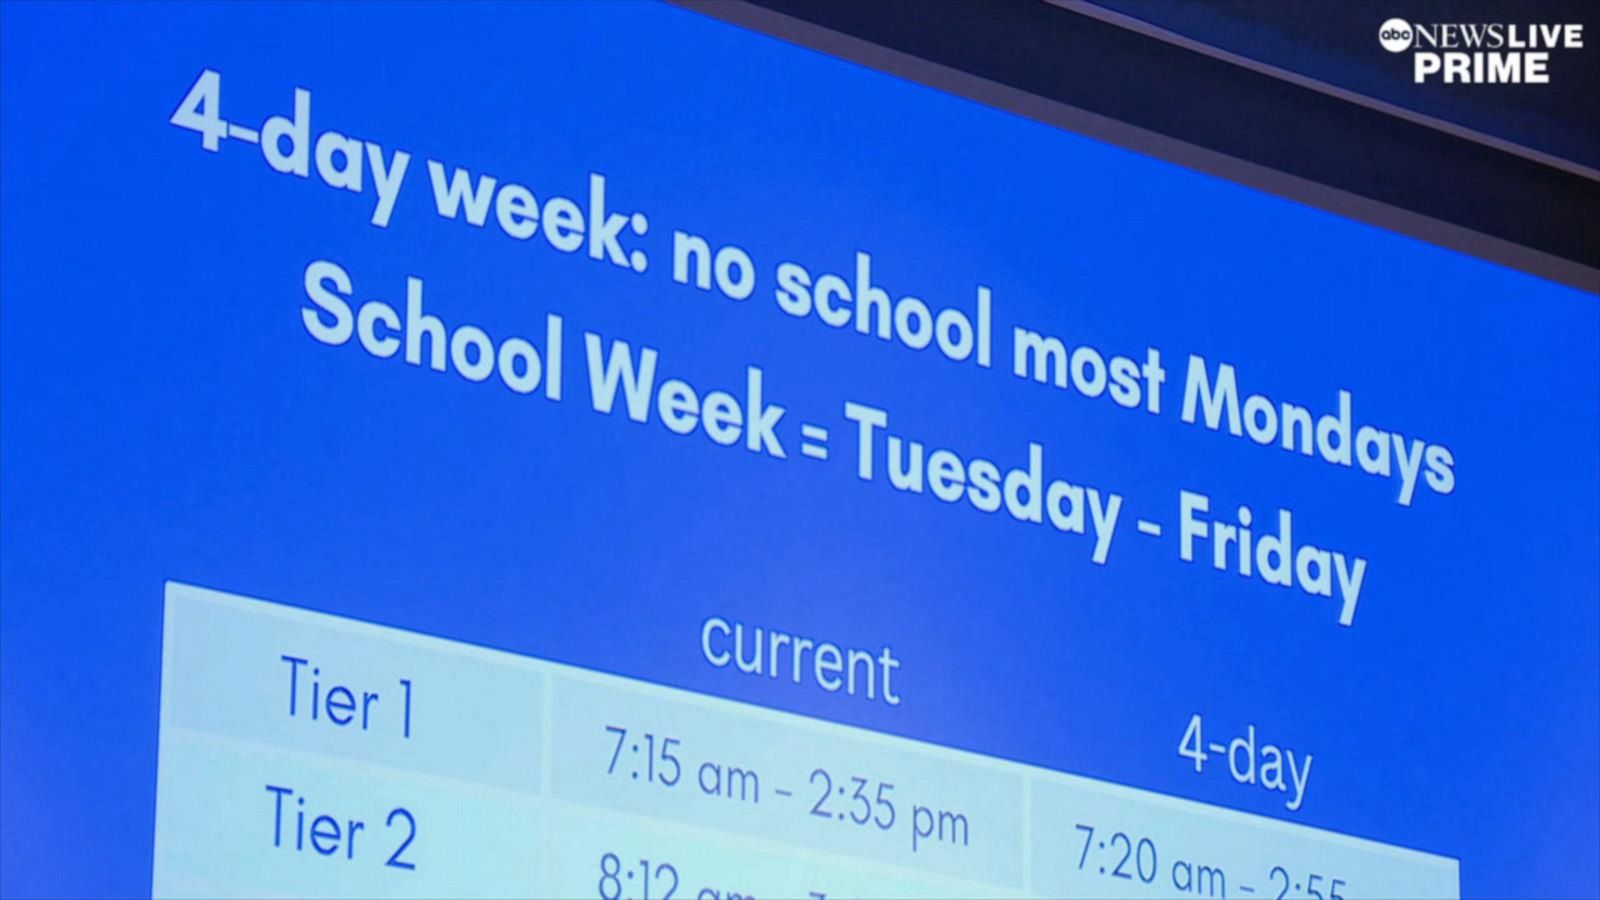 More states turning to 4day school weeks to address teacher shortages